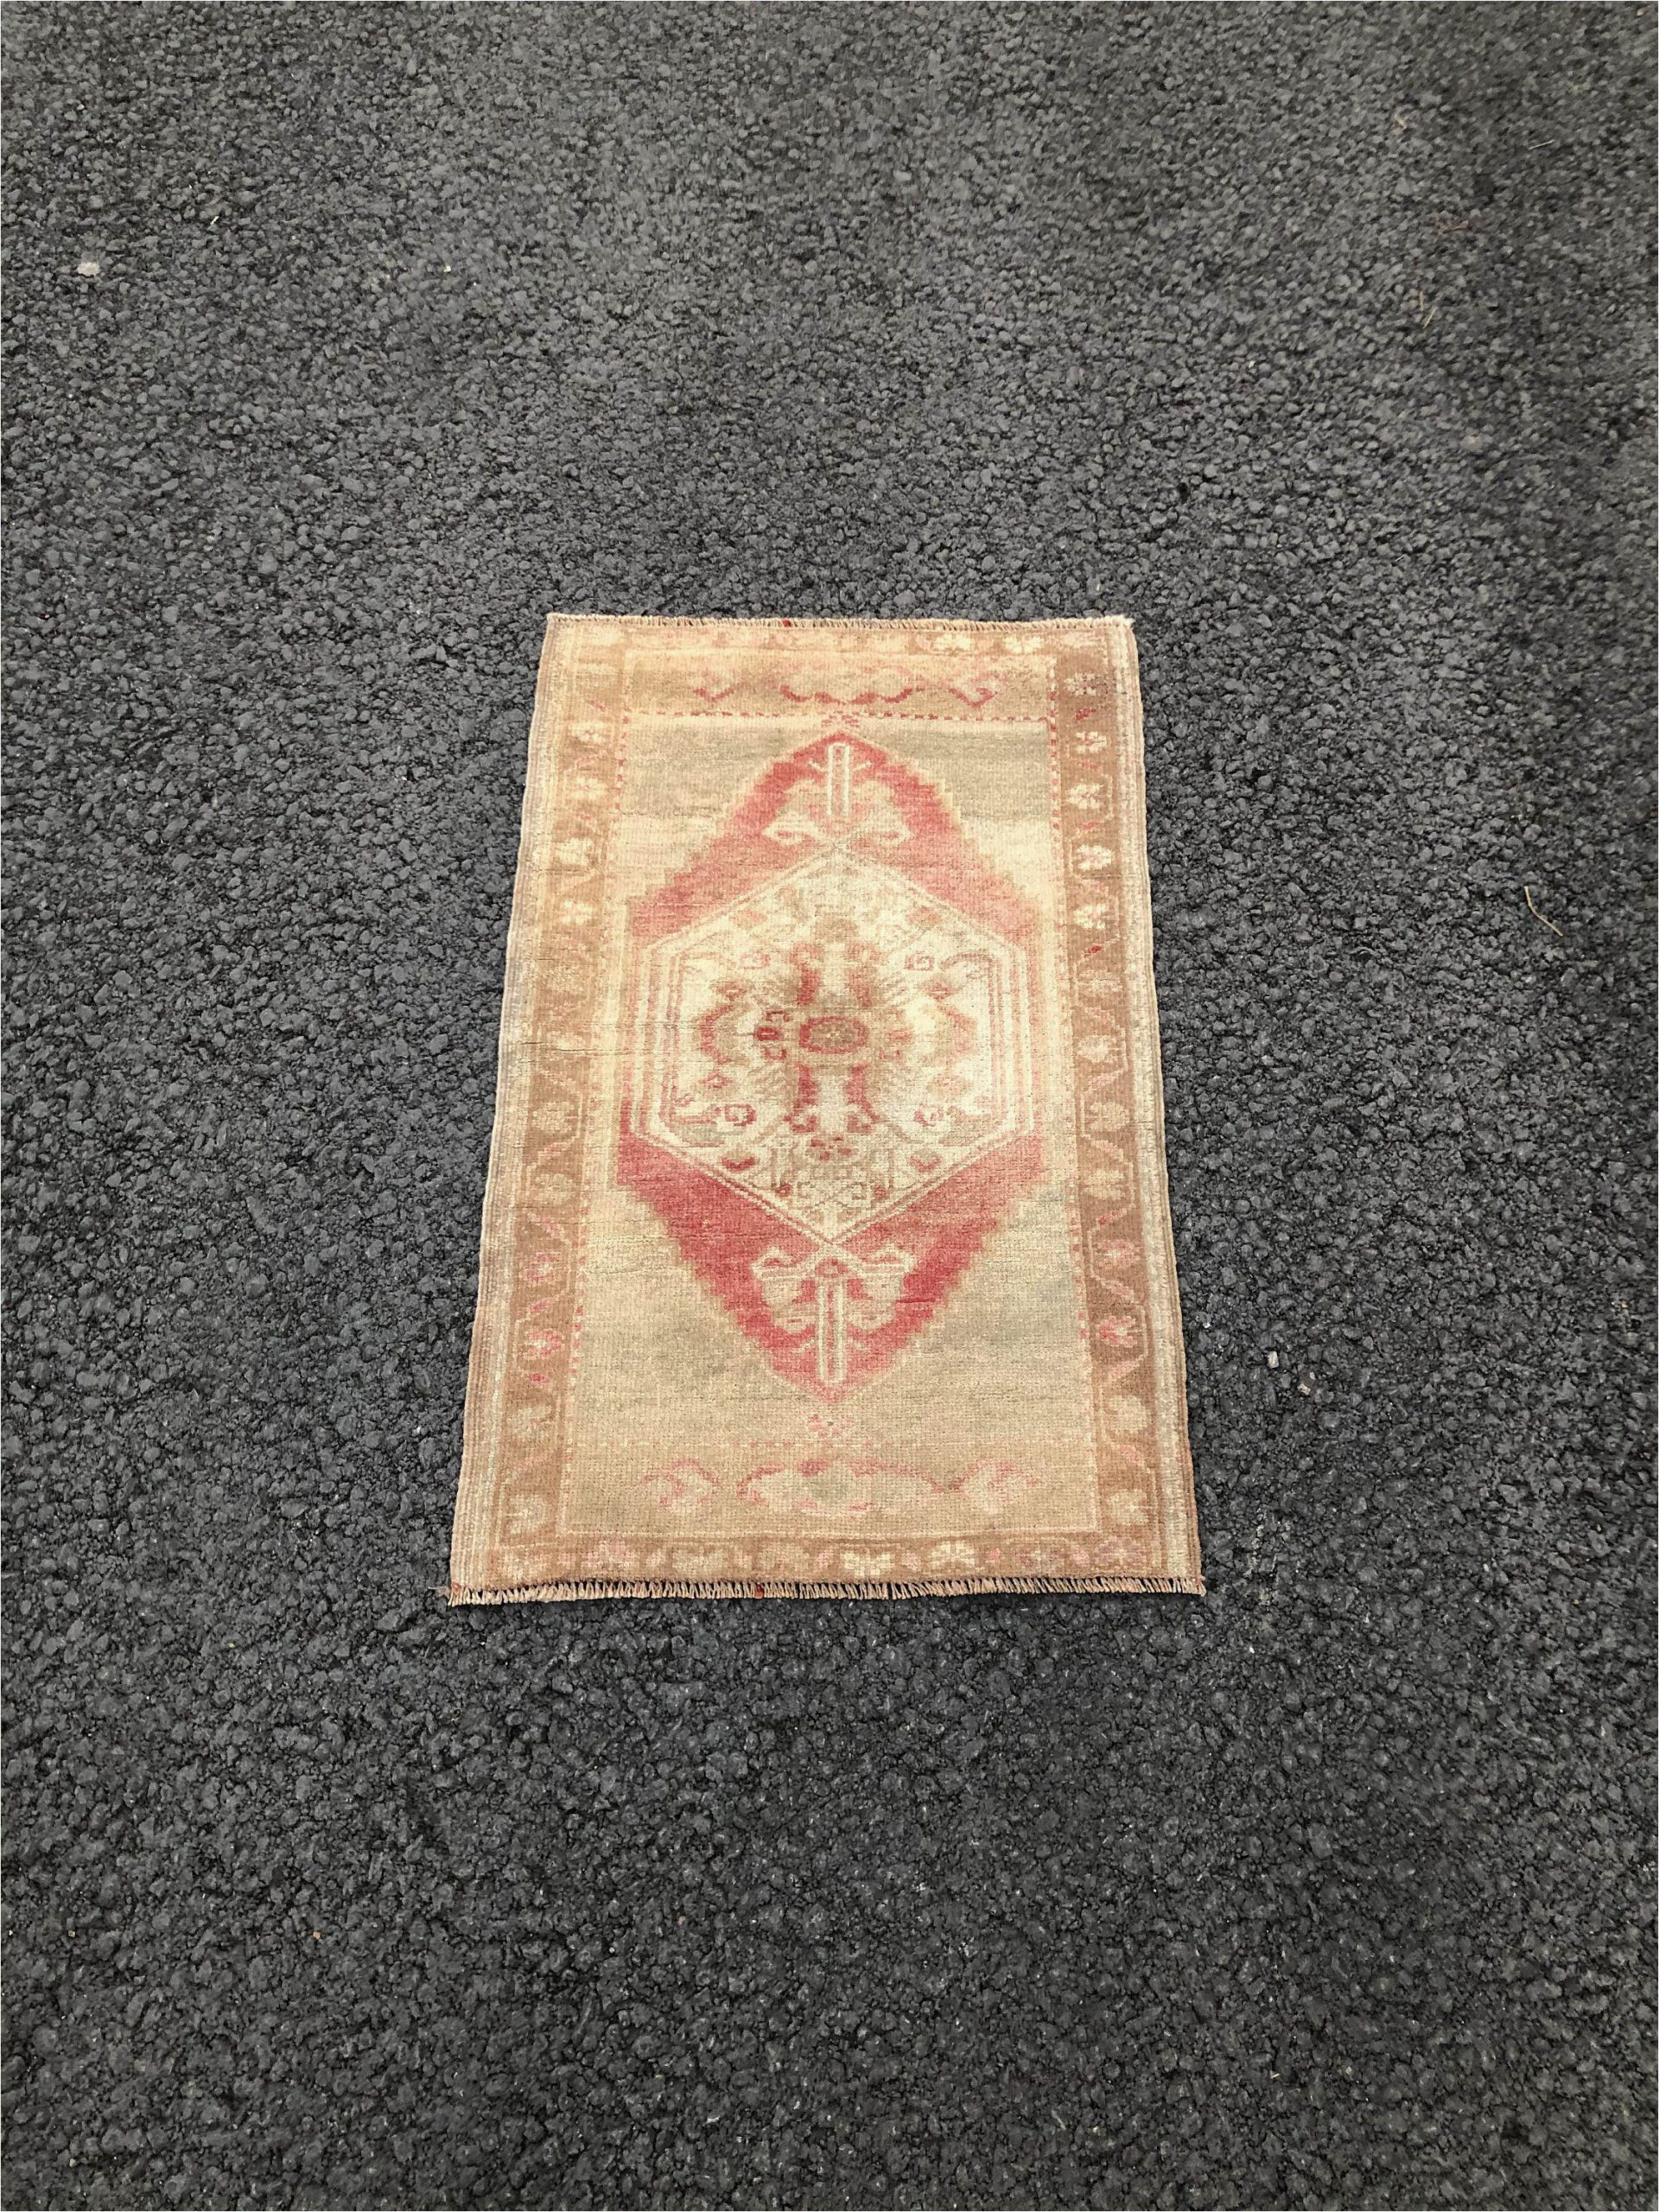 Thin Rugs for Bathroom Small Oushak Rug 1 9 X 3 1 Ft Vintage Brown Turkish Rug